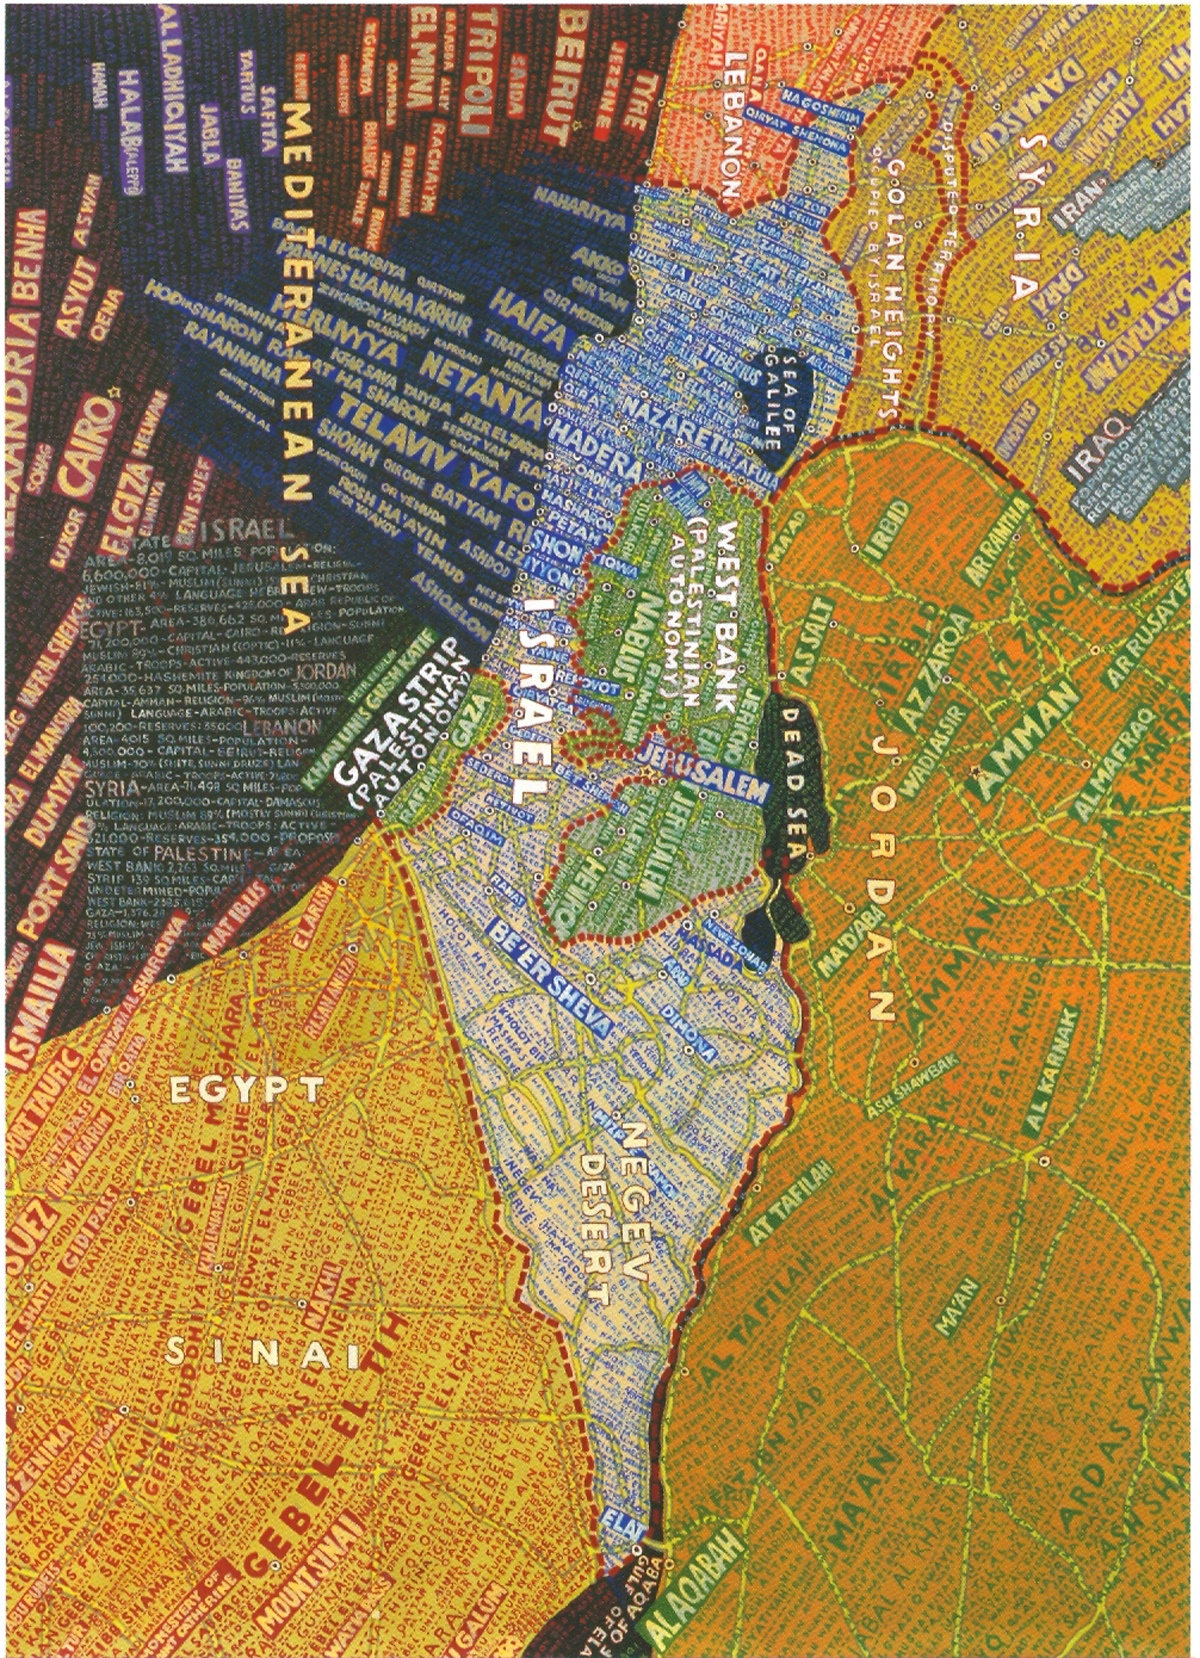 Israel (2007), Acrylic on canvas by Paula Scher Courtesy Hebrew Union College Museum